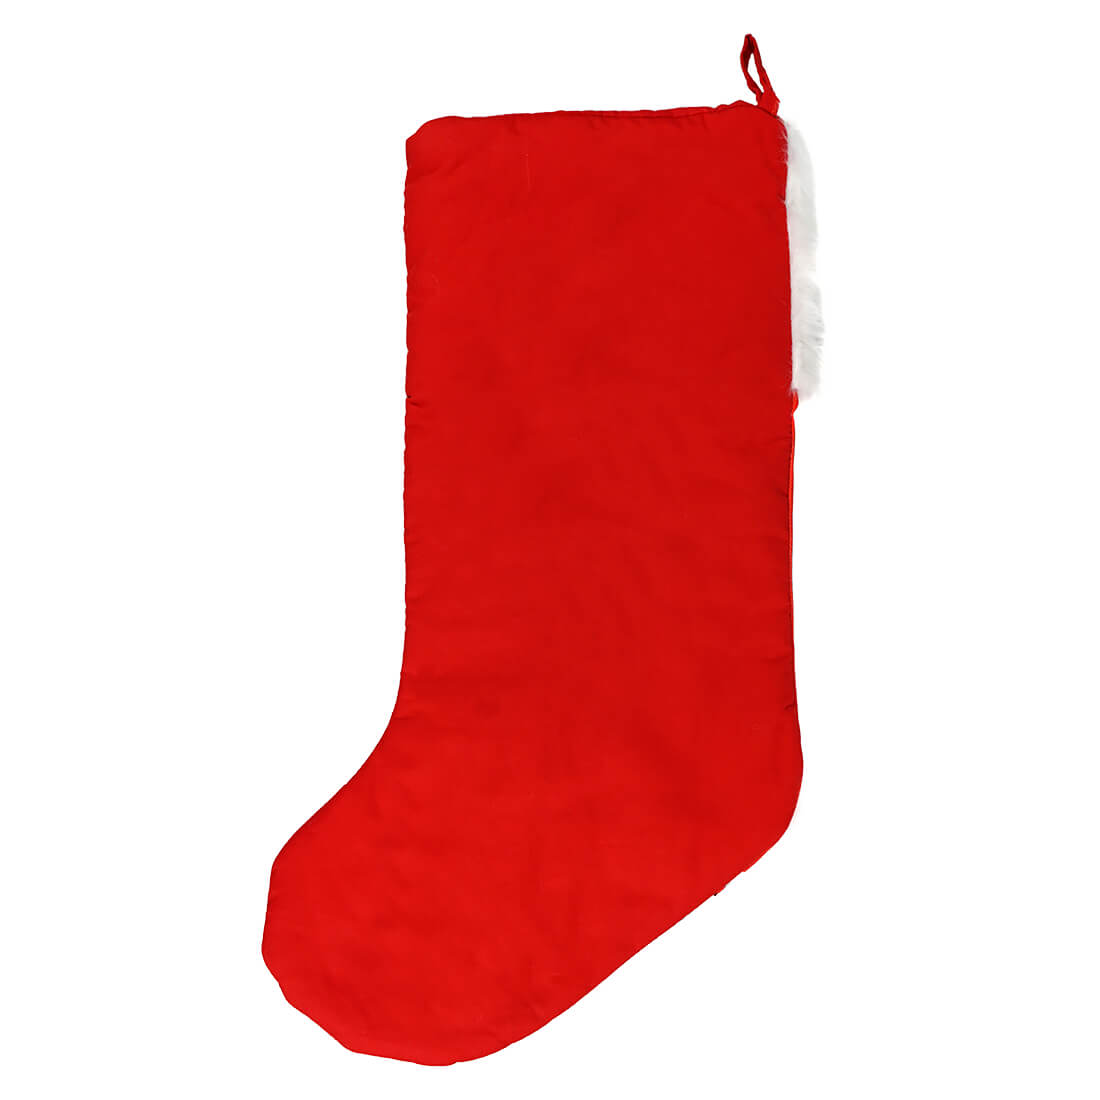 Red Traditional Snowman With Candy Cane Printed Stocking